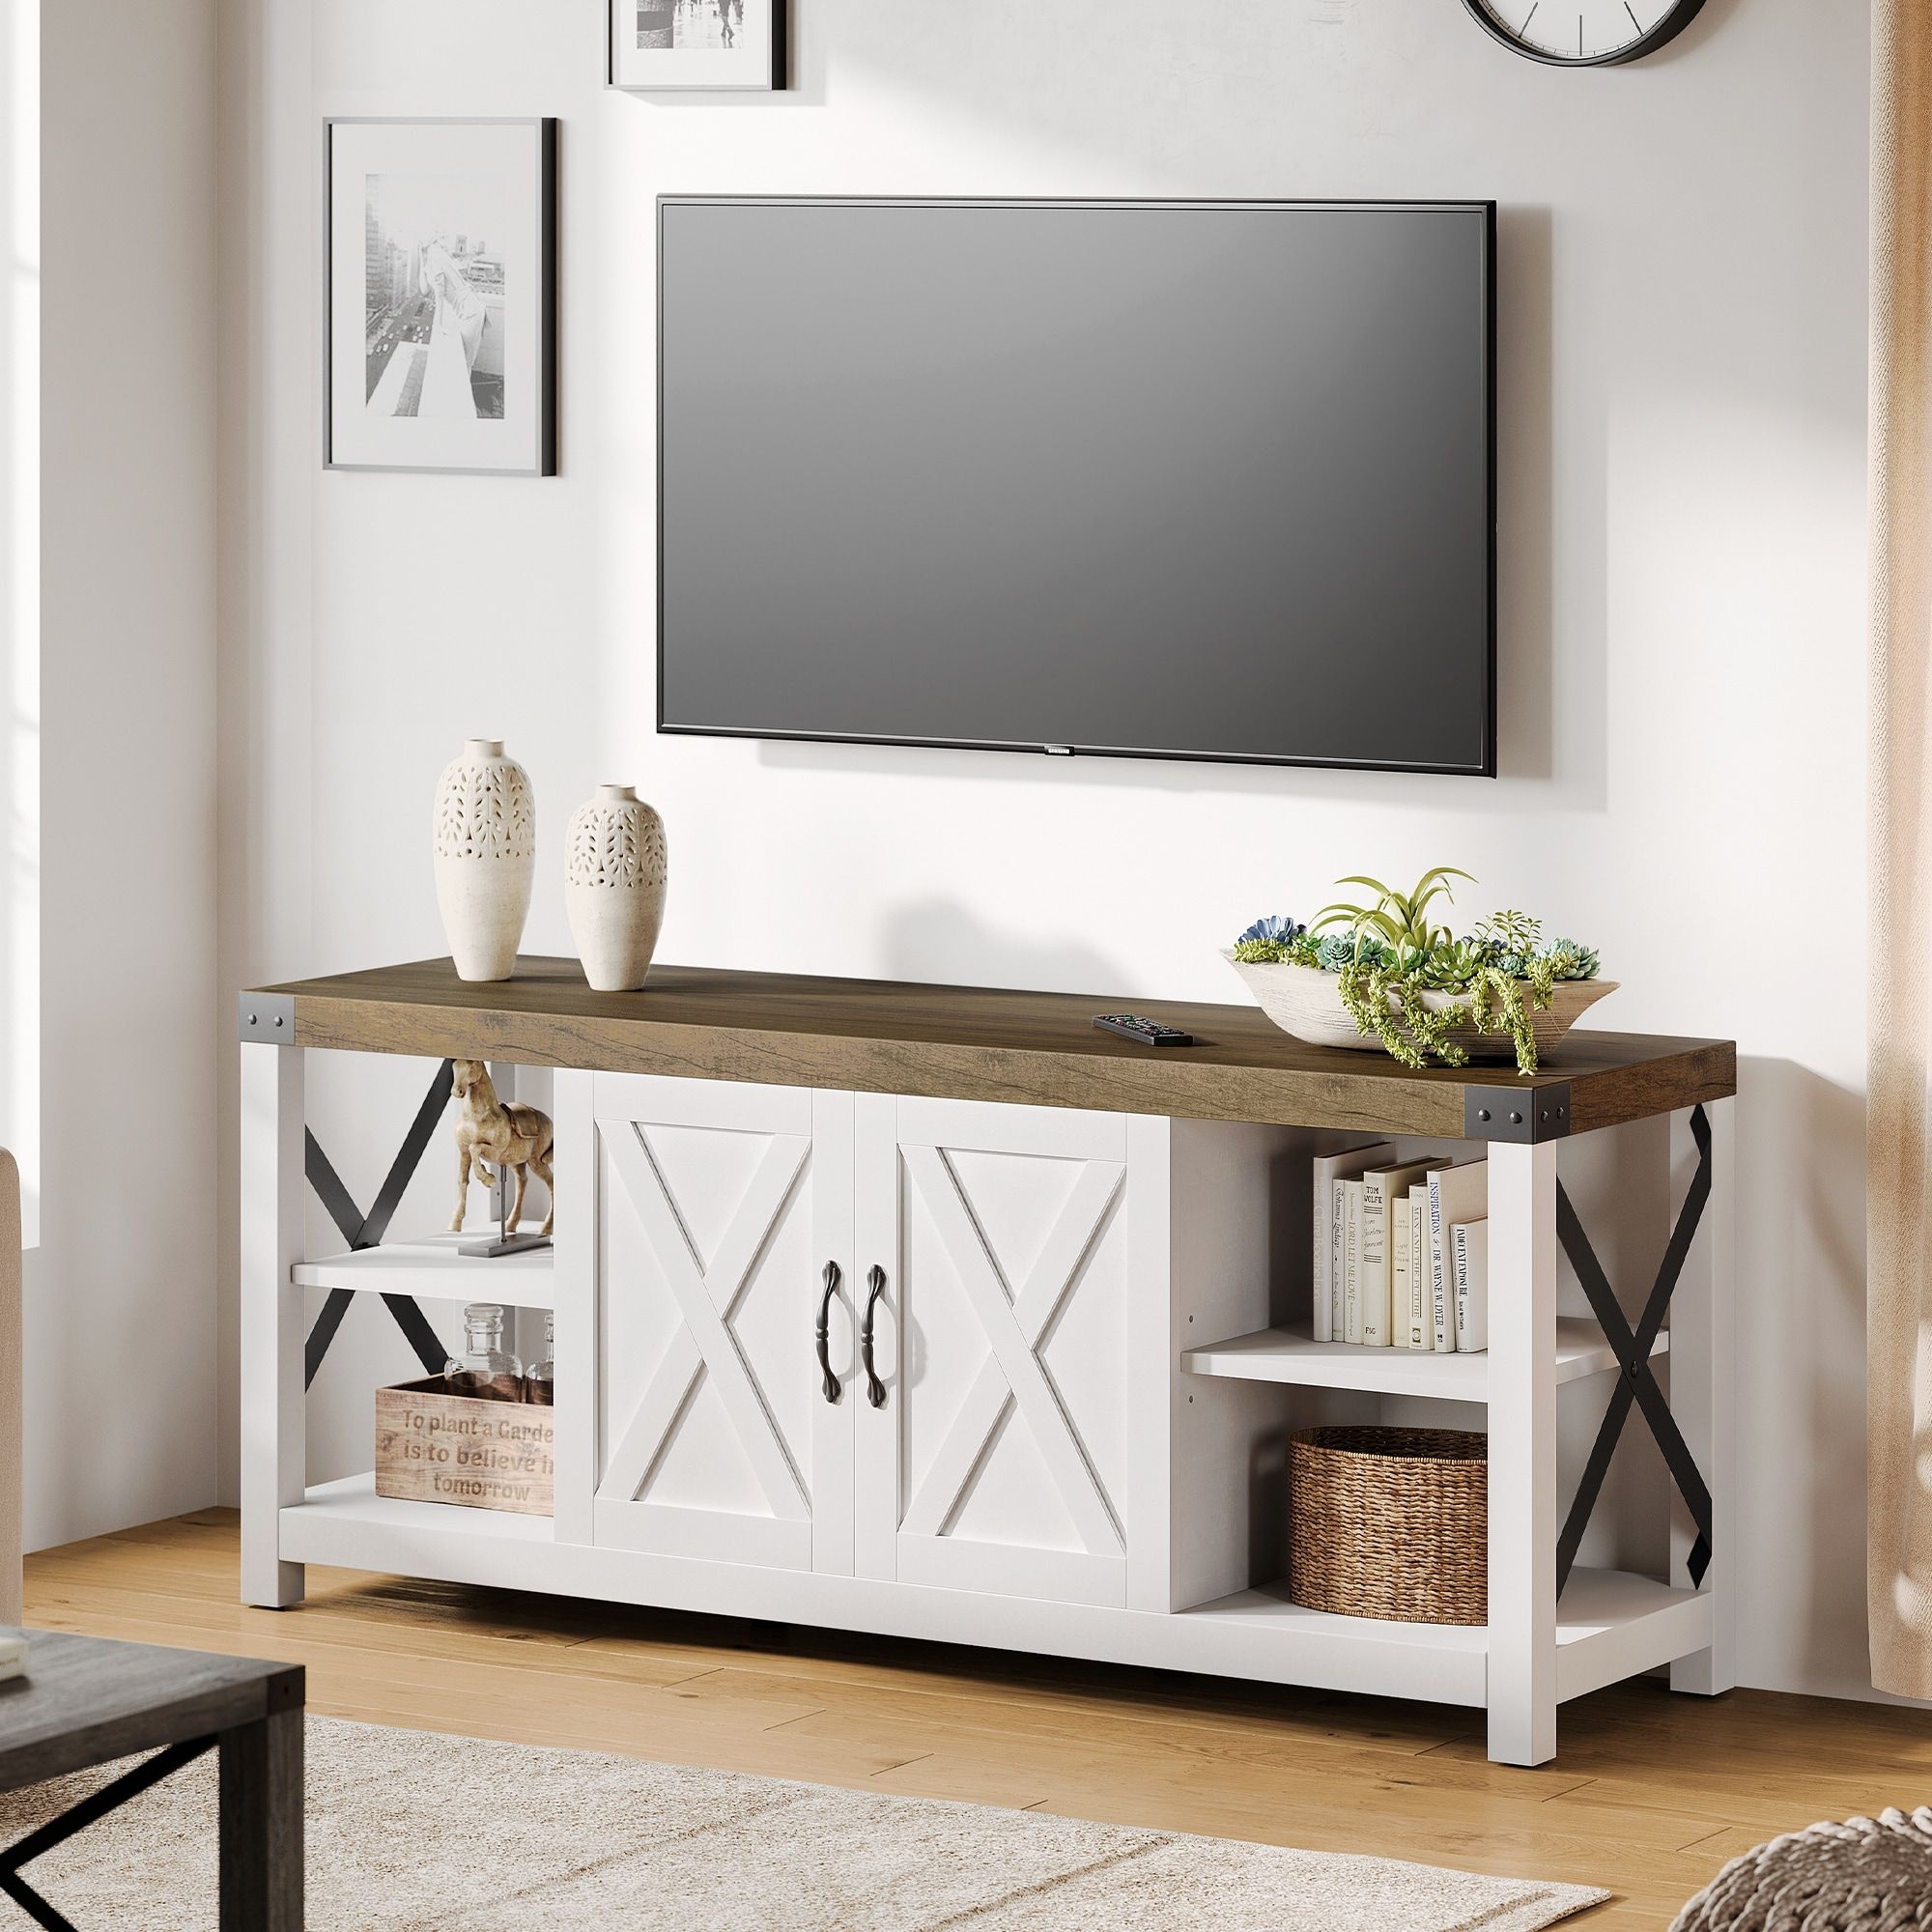 59 Inch Tv Stand For Tv Up To 50 60 65 Inches, Farmhouse Wood Tv Cabinet  Entertainment Center – 59" – On Sale – Bed Bath & Beyond – 36742172 Within Farmhouse Stands For Tvs (Photo 13 of 15)